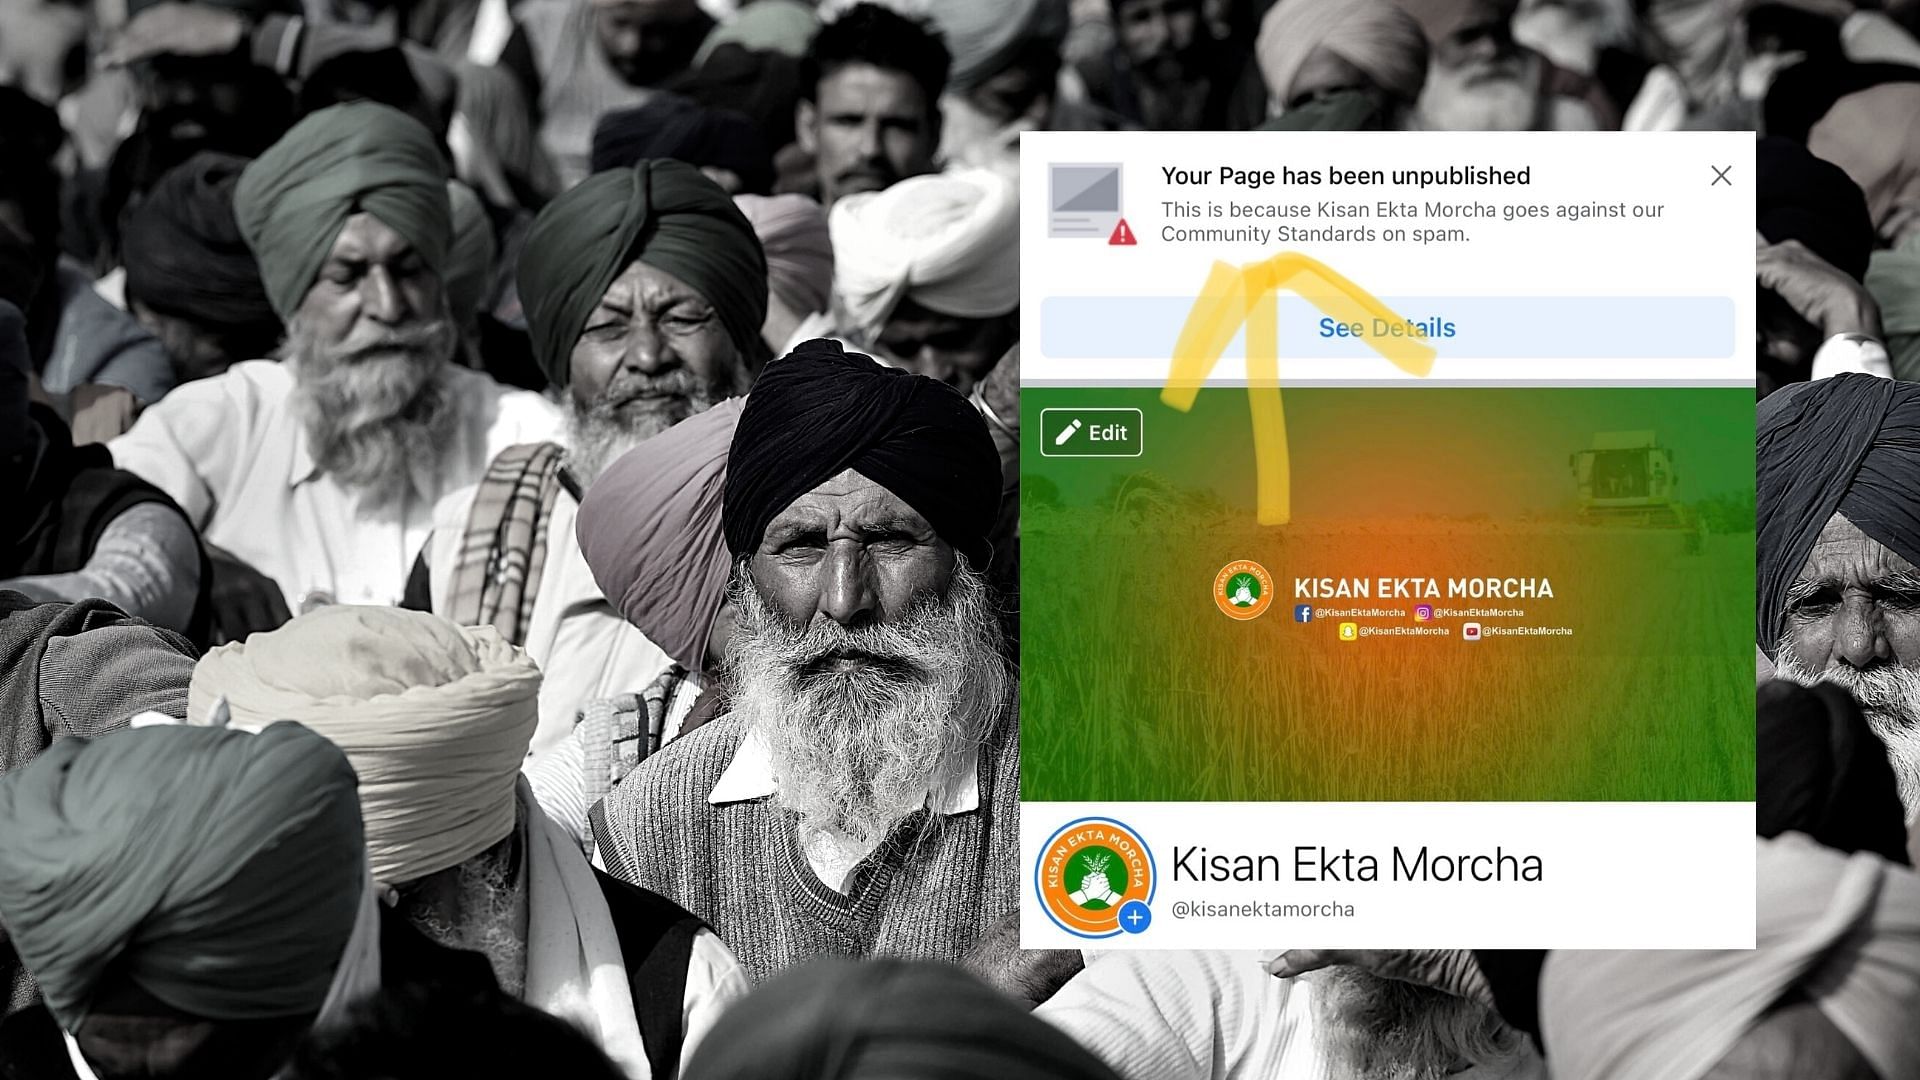 The Facebook page of Kisan Ekta Morcha that was being used by the farmers who are <a href="https://www.thequint.com/topic/farmers-protest">protesting</a> against the contentious farm laws, was blocked on Sunday, 20 December.